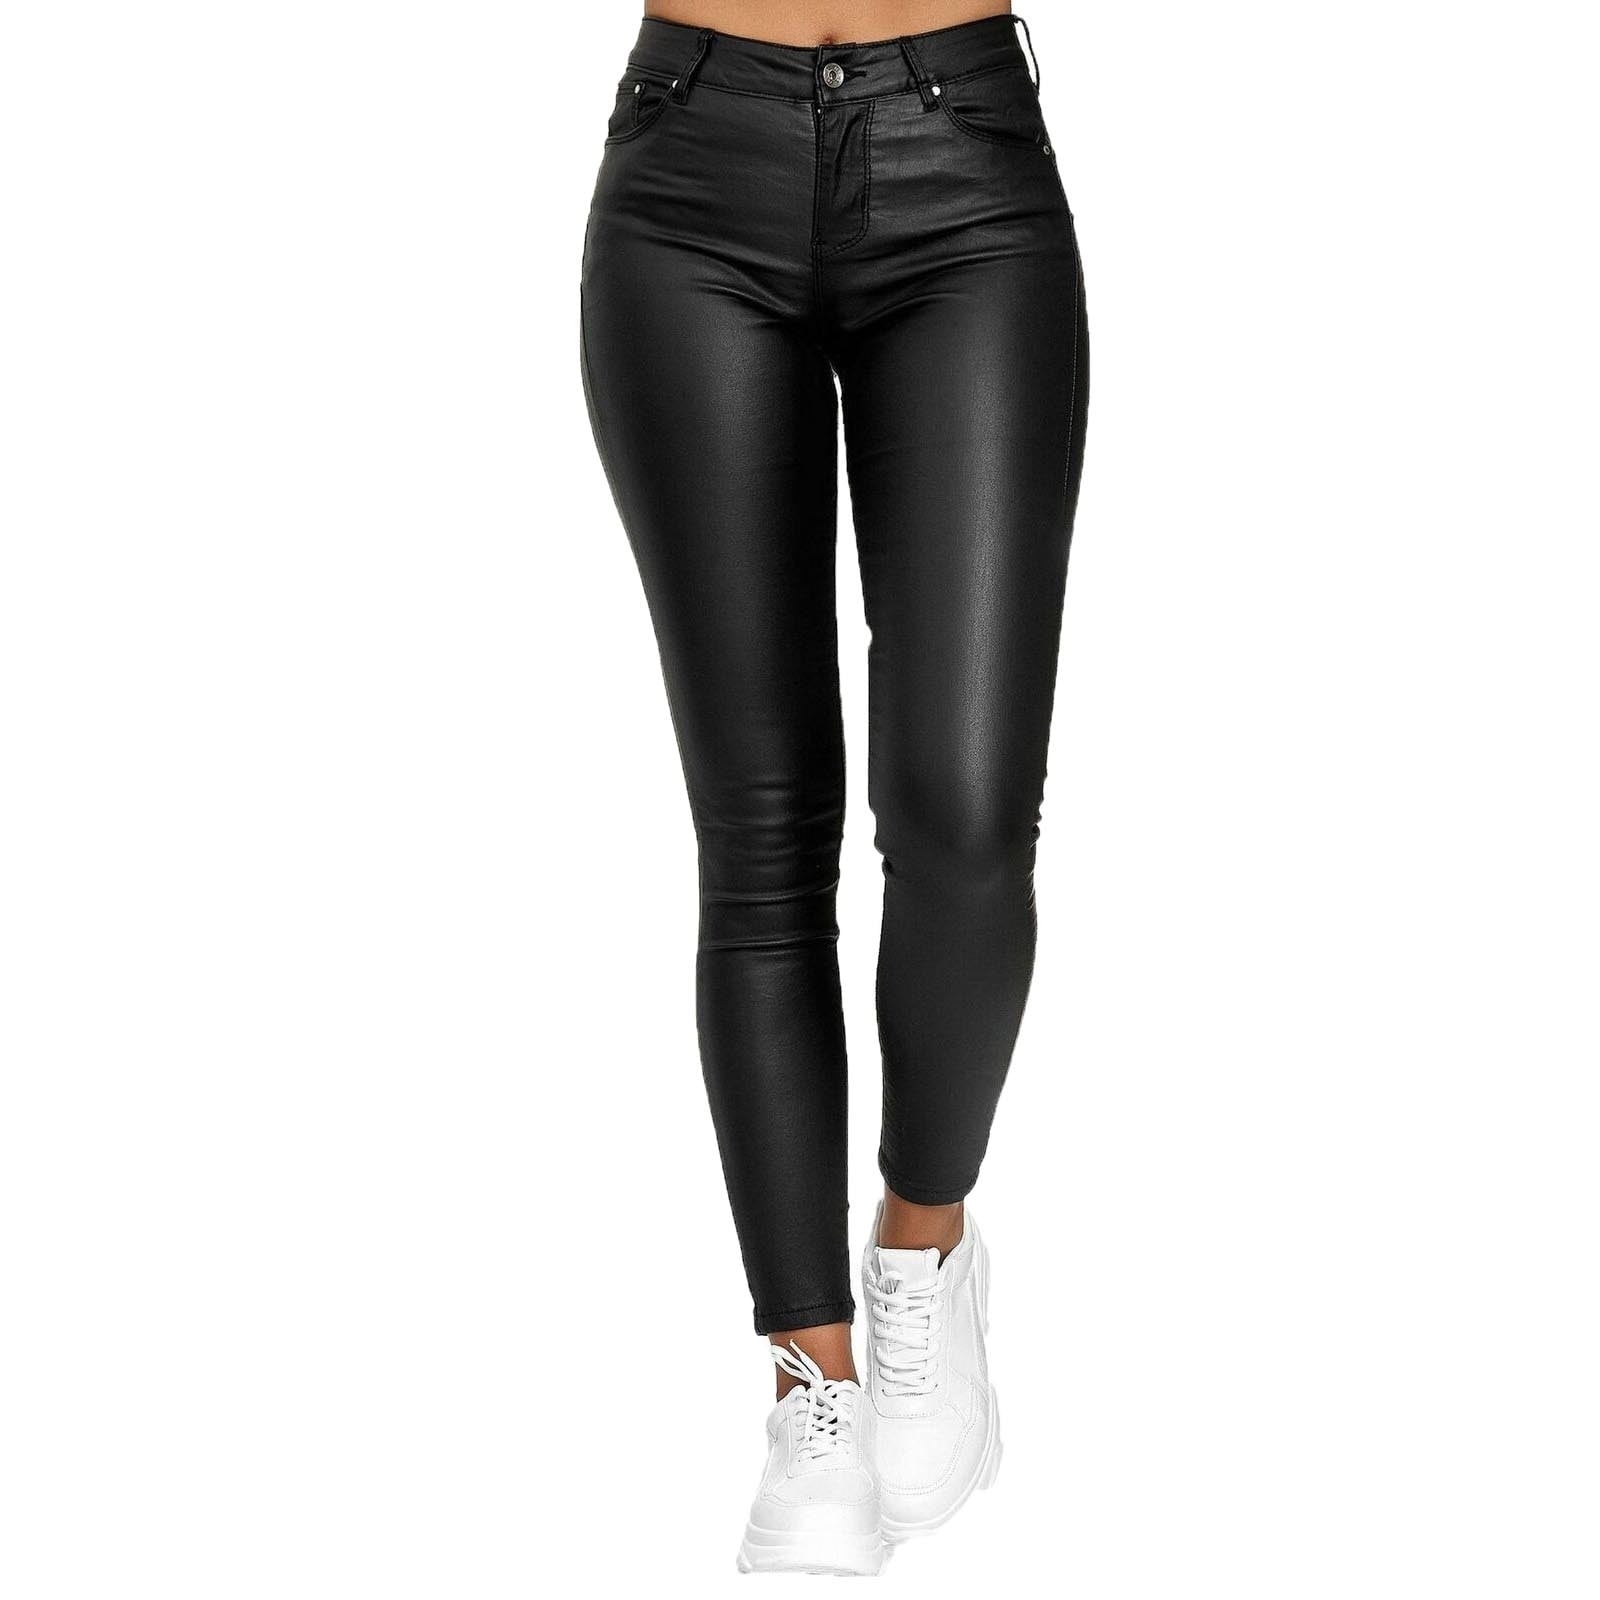 Autumn Skinny Leather Petite Faux Leather Trousers With Zipper And High  Waist Design Sexy Open Front, Solid PU, Stretchy And Comfortable From  Yunini, $24.67